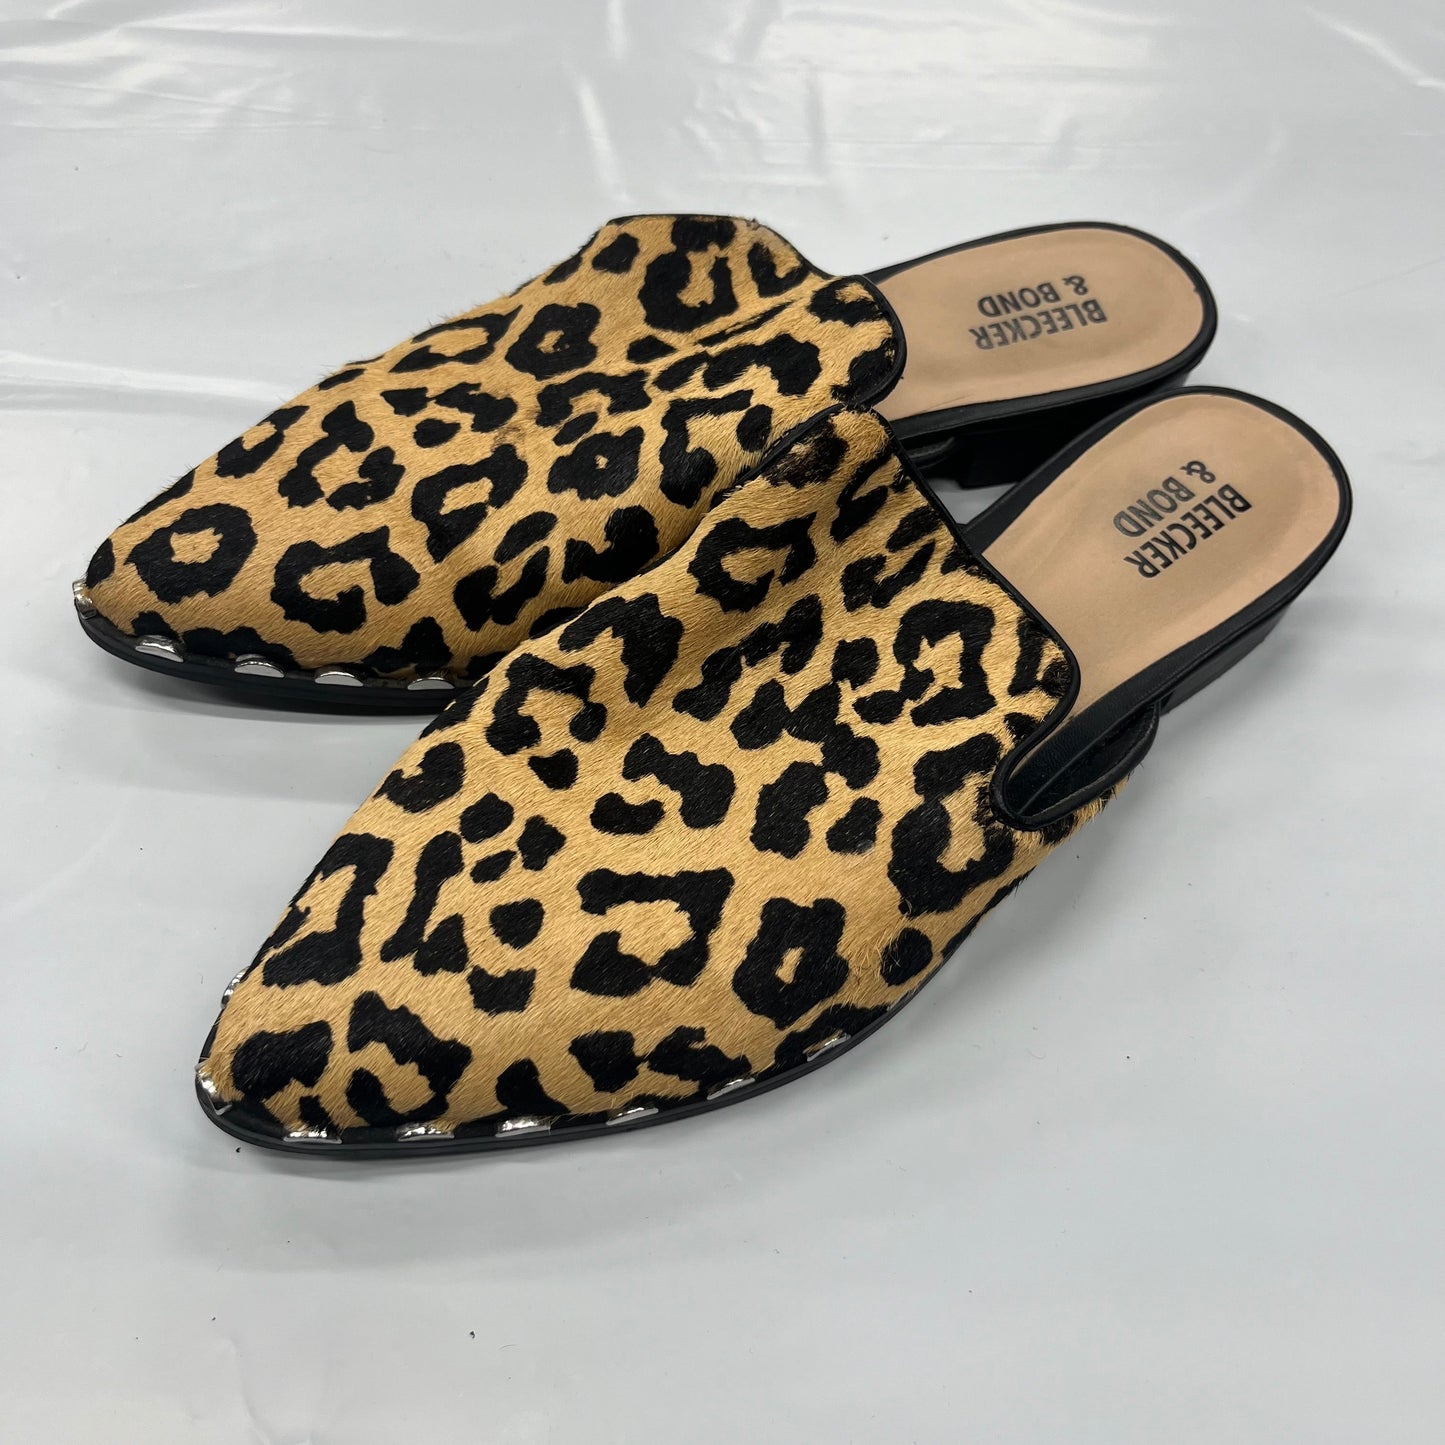 Animal Print Shoes Flats Espadrille Blecker And Bond, Size 7.5